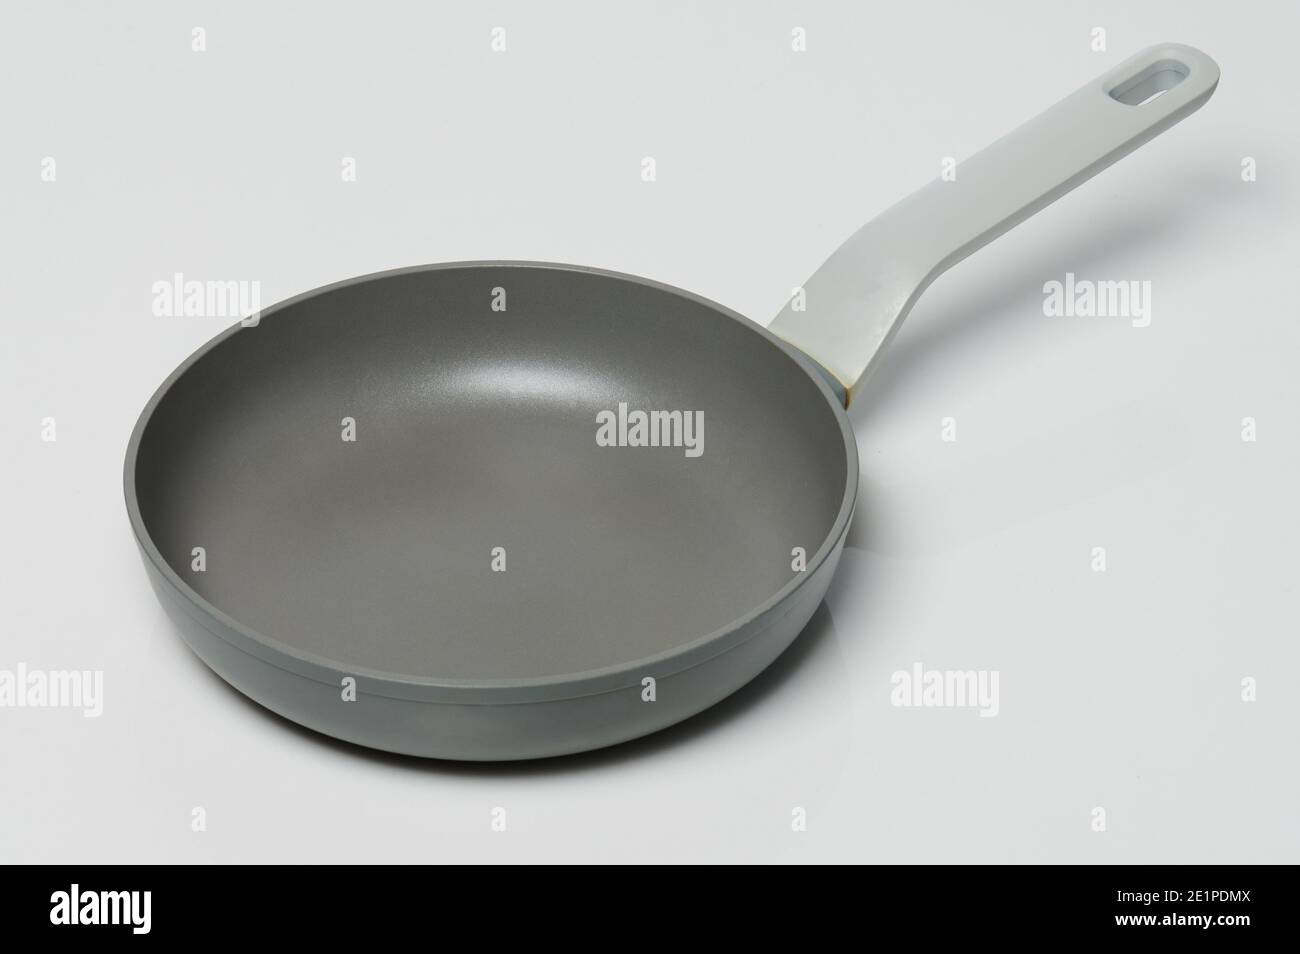 Ceramic gray cooking pan with handle isolated Stock Photo